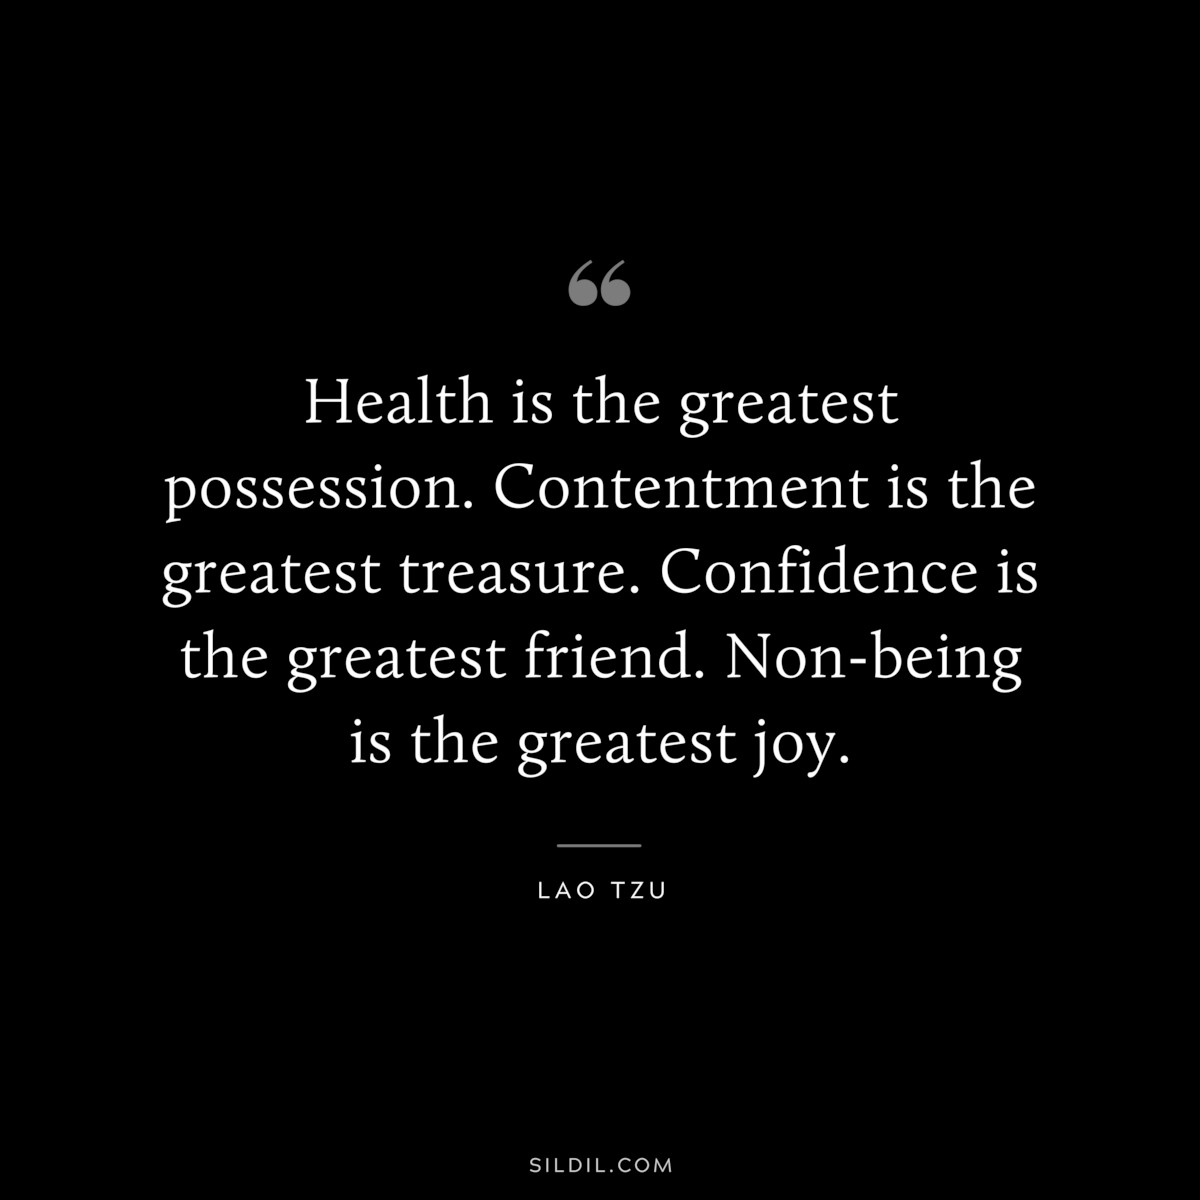 Health is the greatest possession. Contentment is the greatest treasure. Confidence is the greatest friend. Non-being is the greatest joy. ― Lao Tzu